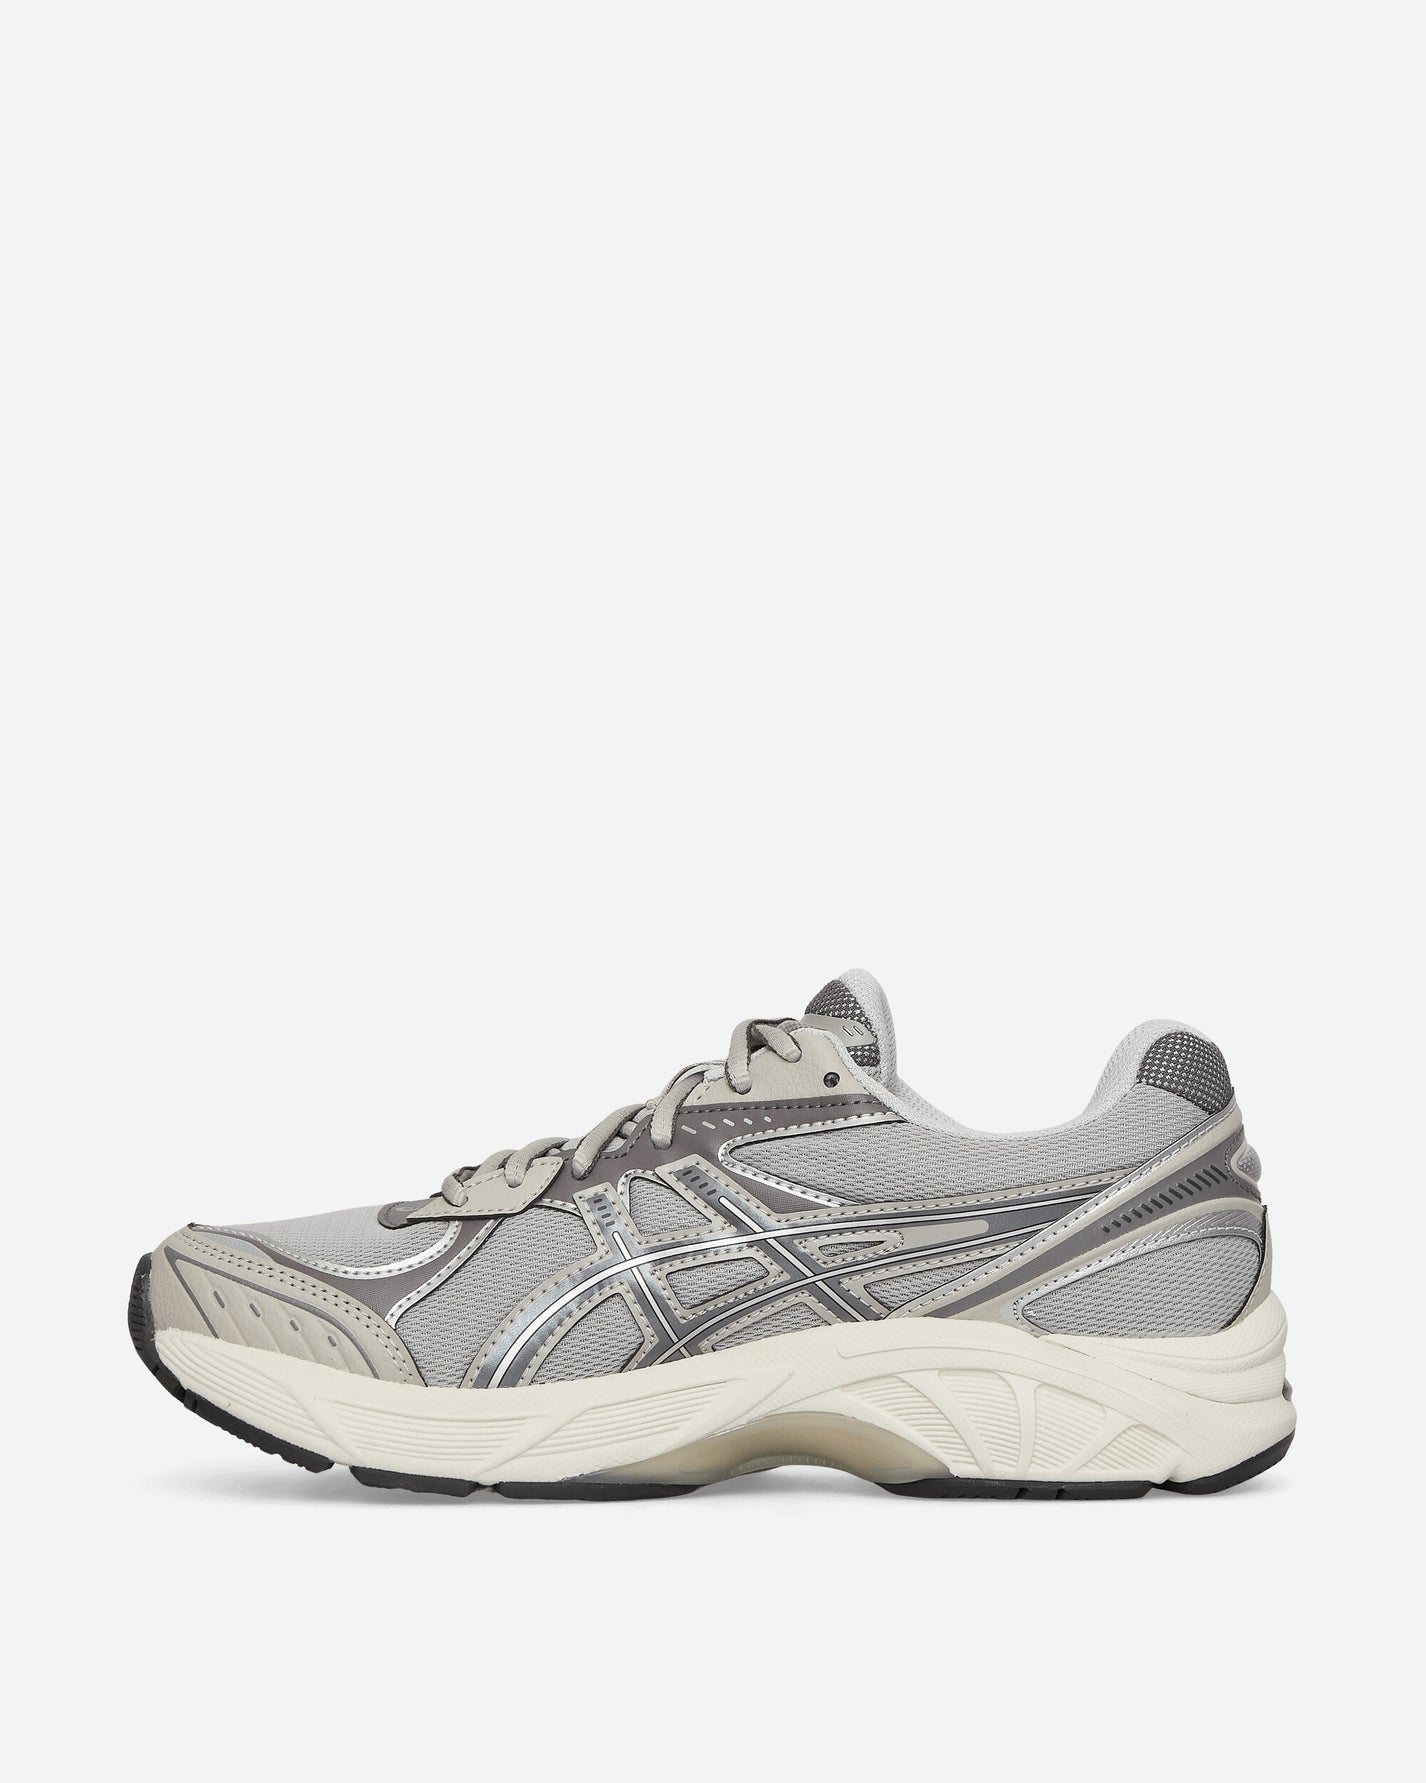 Asics Gt-2160 Oyster Grey/Carbon Sneakers Low 1203A320-020